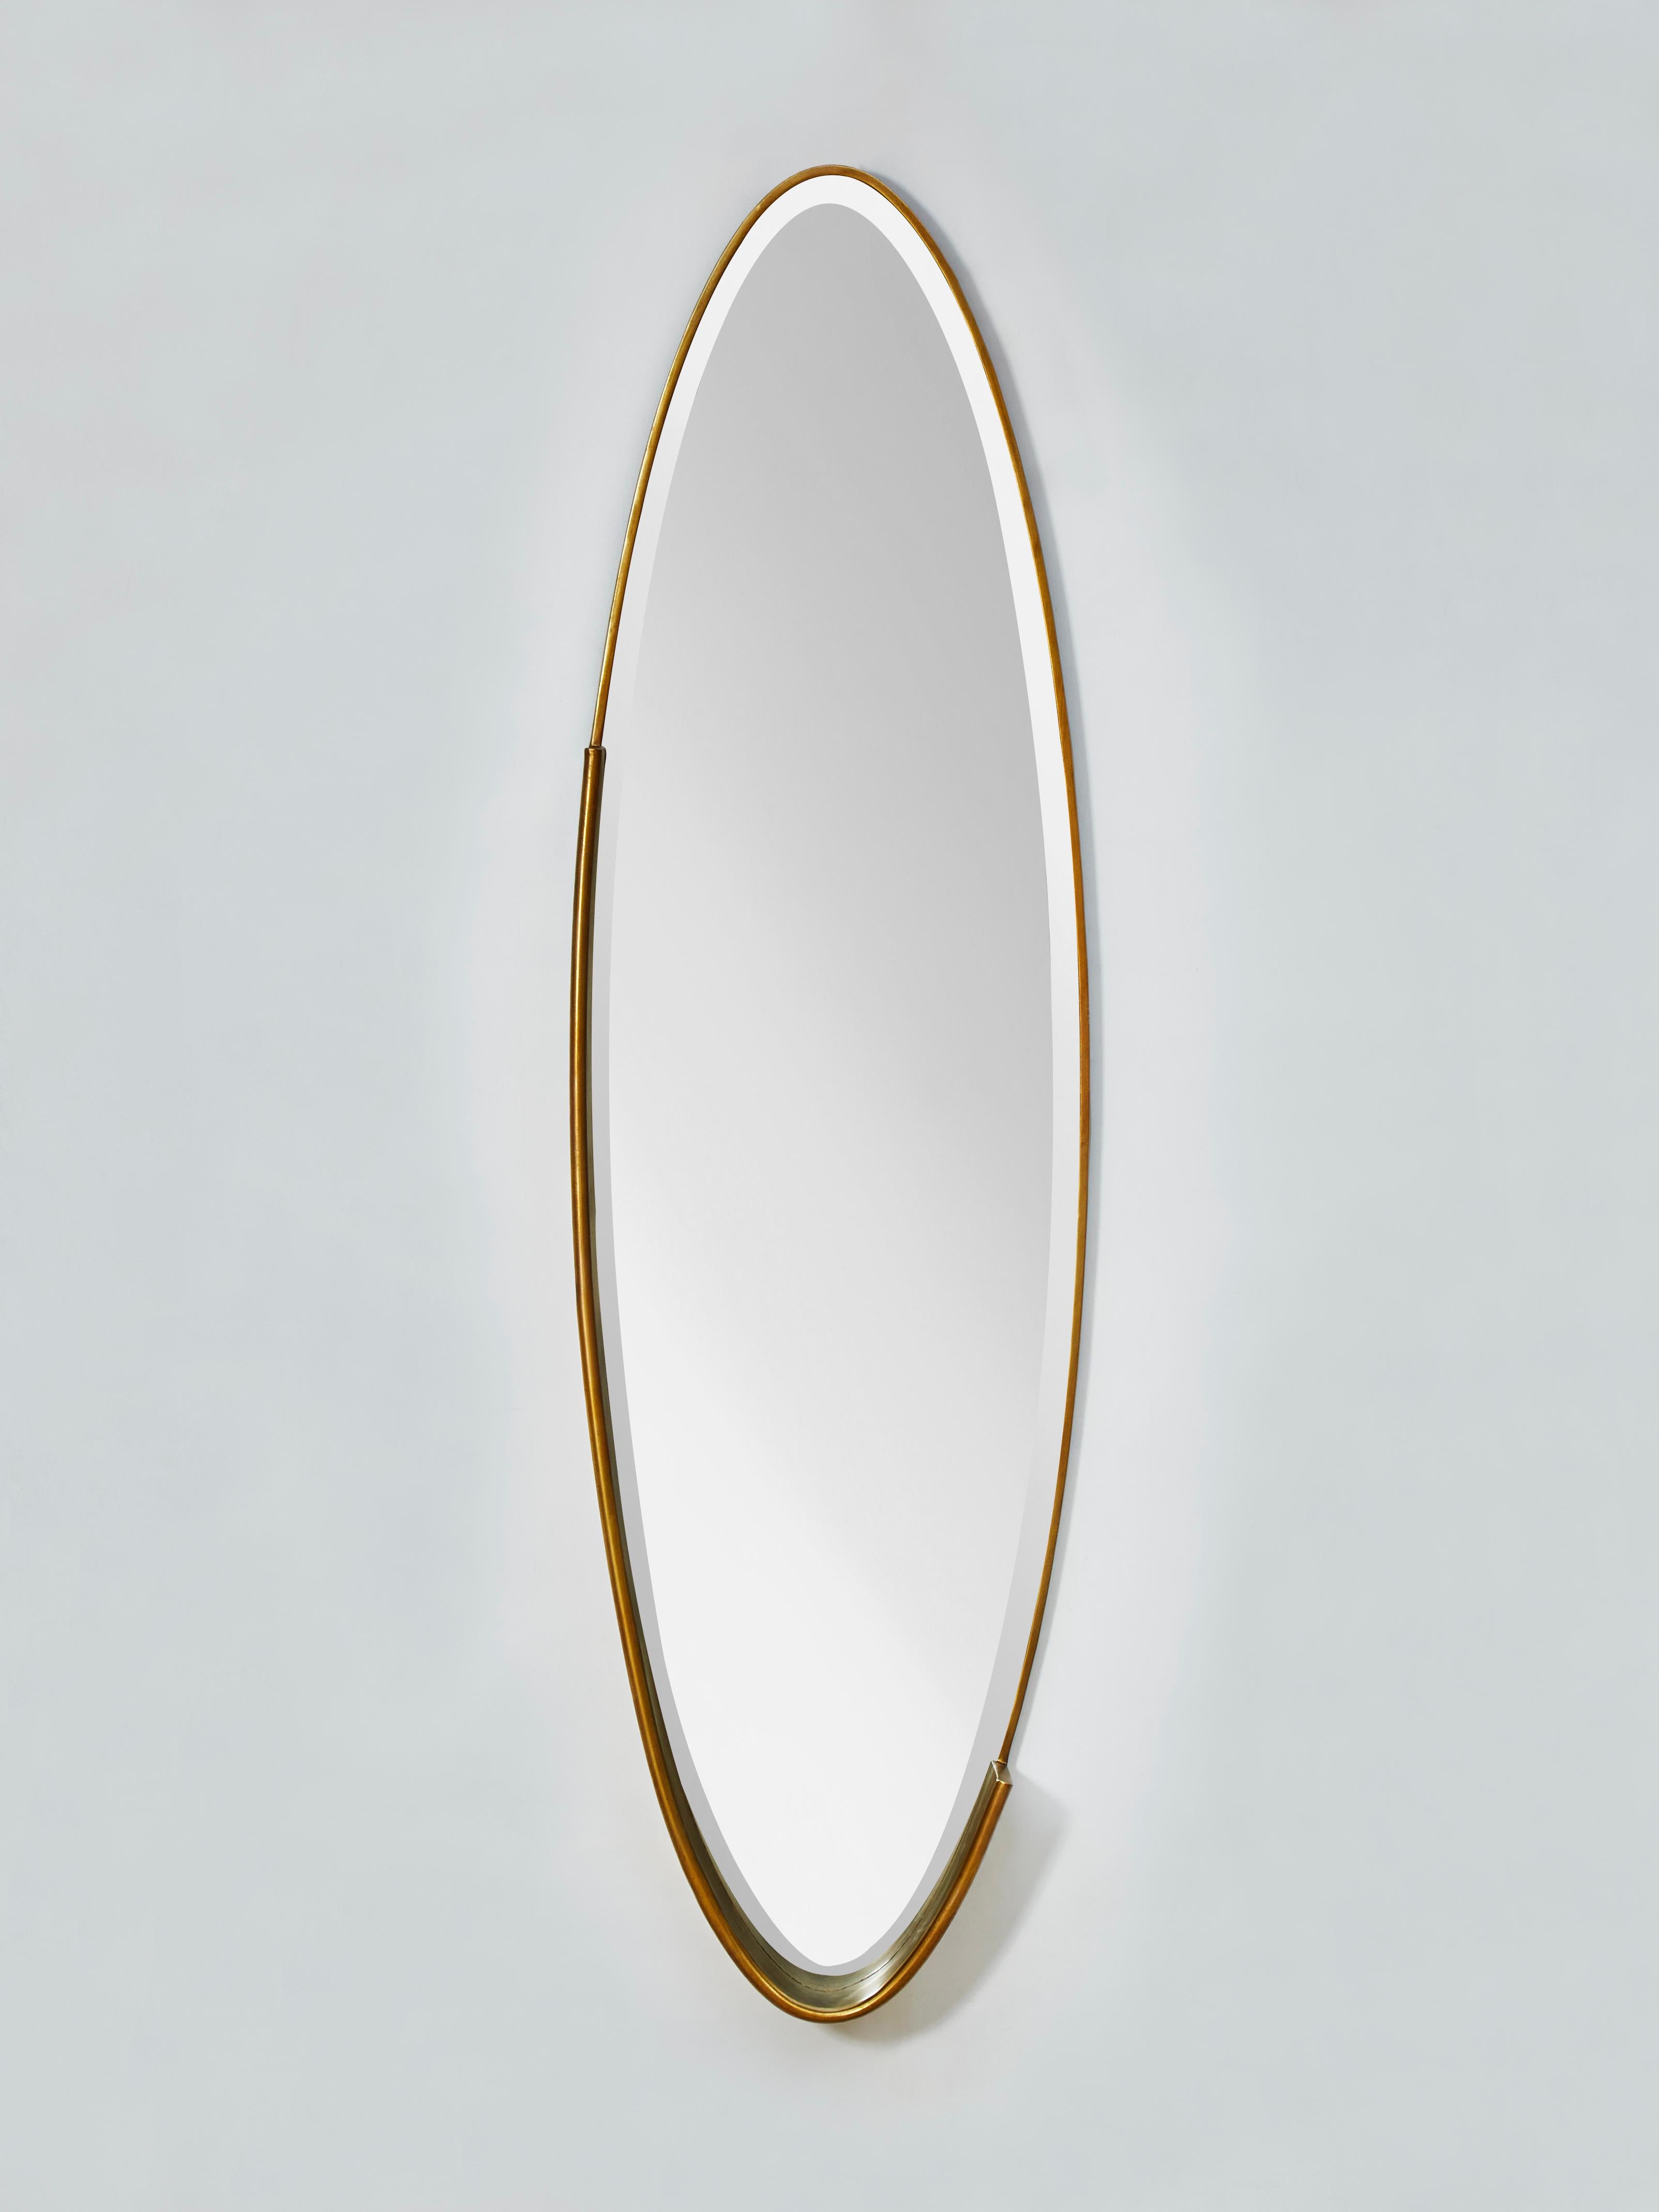 Oval shaped vintage mirror with gilt metal frame.
France, 1980s.